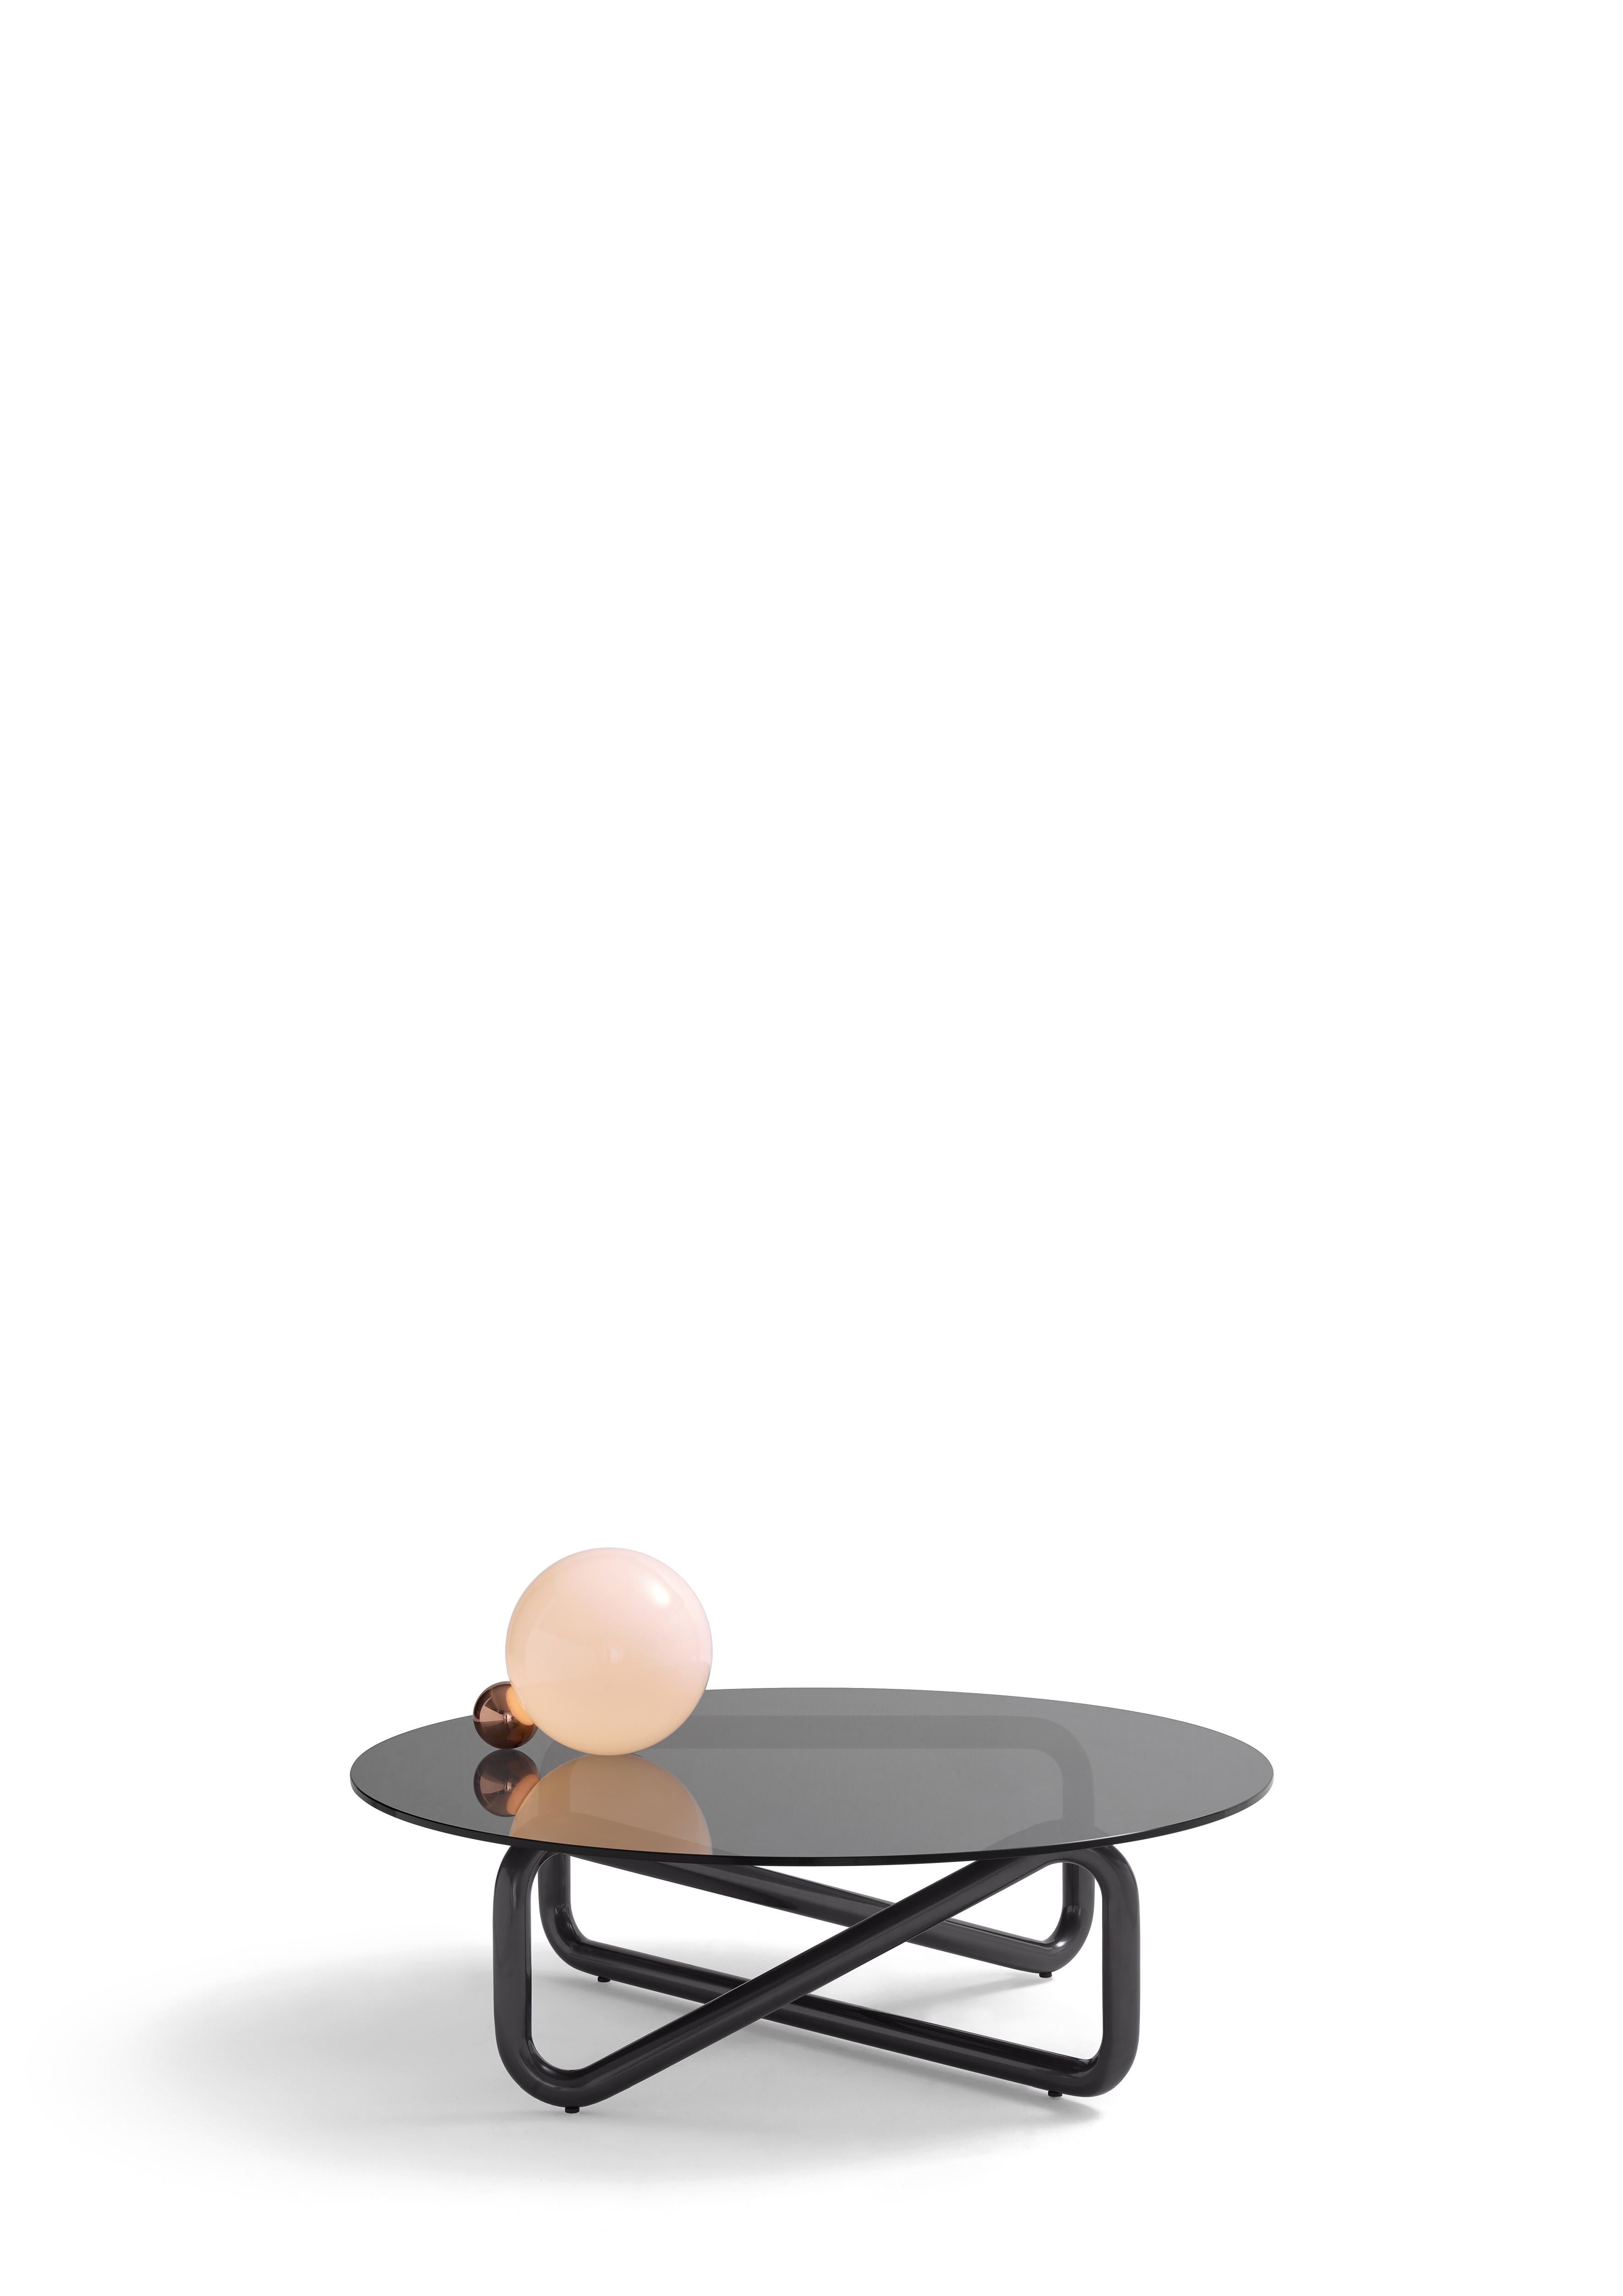 Arflex Infinity 105x105 Small Table in Fume Glass by Claesson Koivisto Rune In New Condition For Sale In Brooklyn, NY